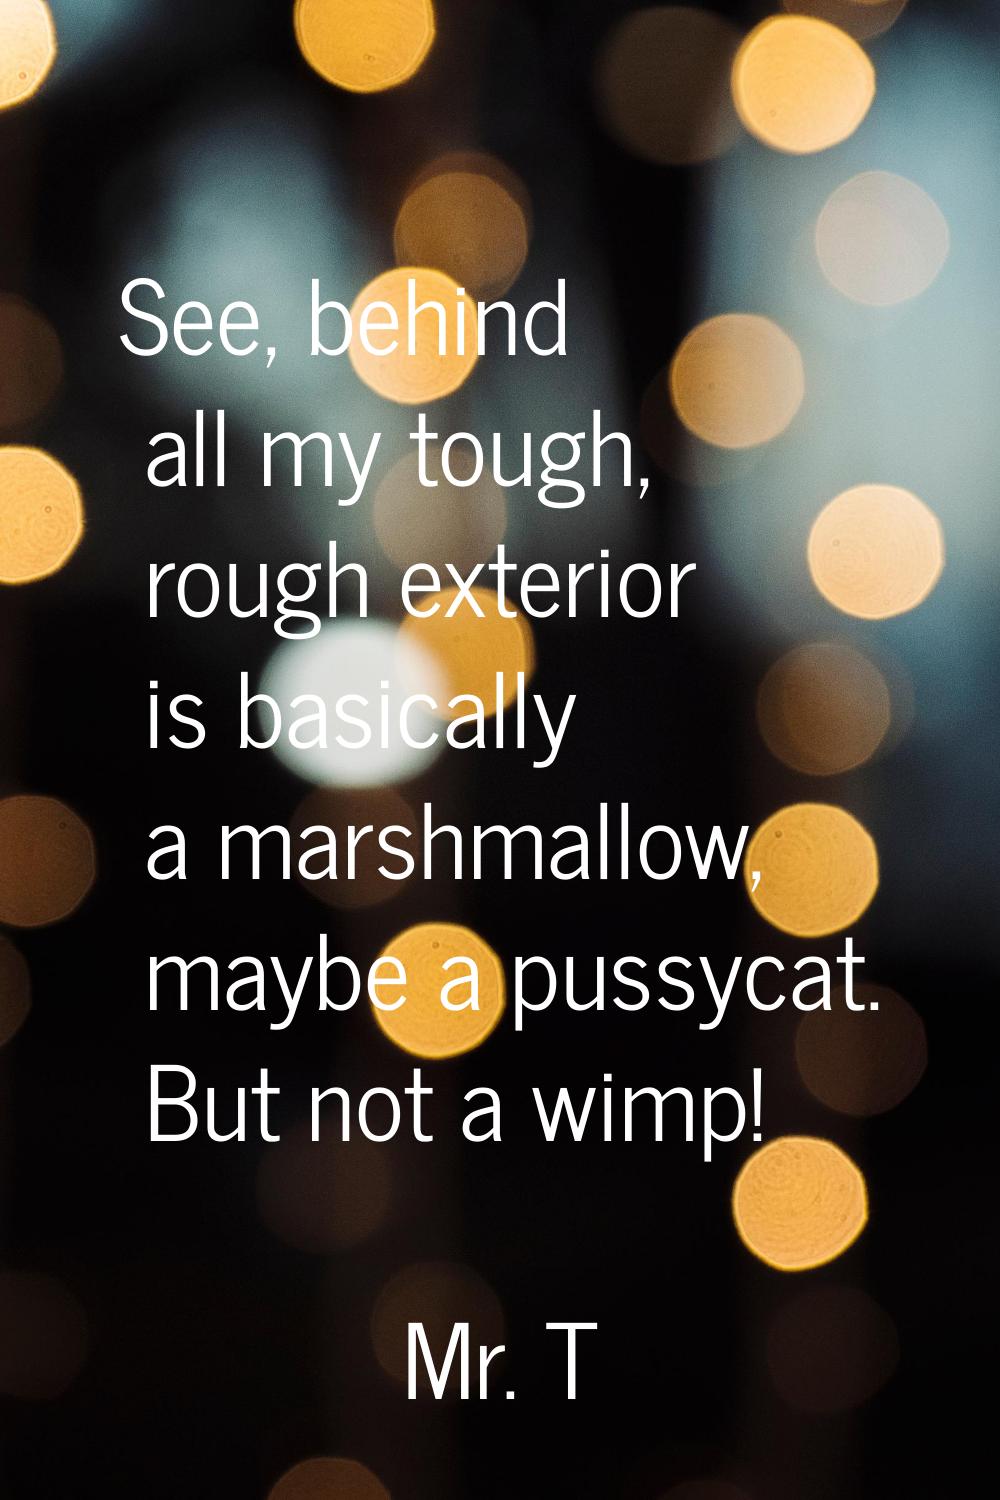 See, behind all my tough, rough exterior is basically a marshmallow, maybe a pussycat. But not a wi